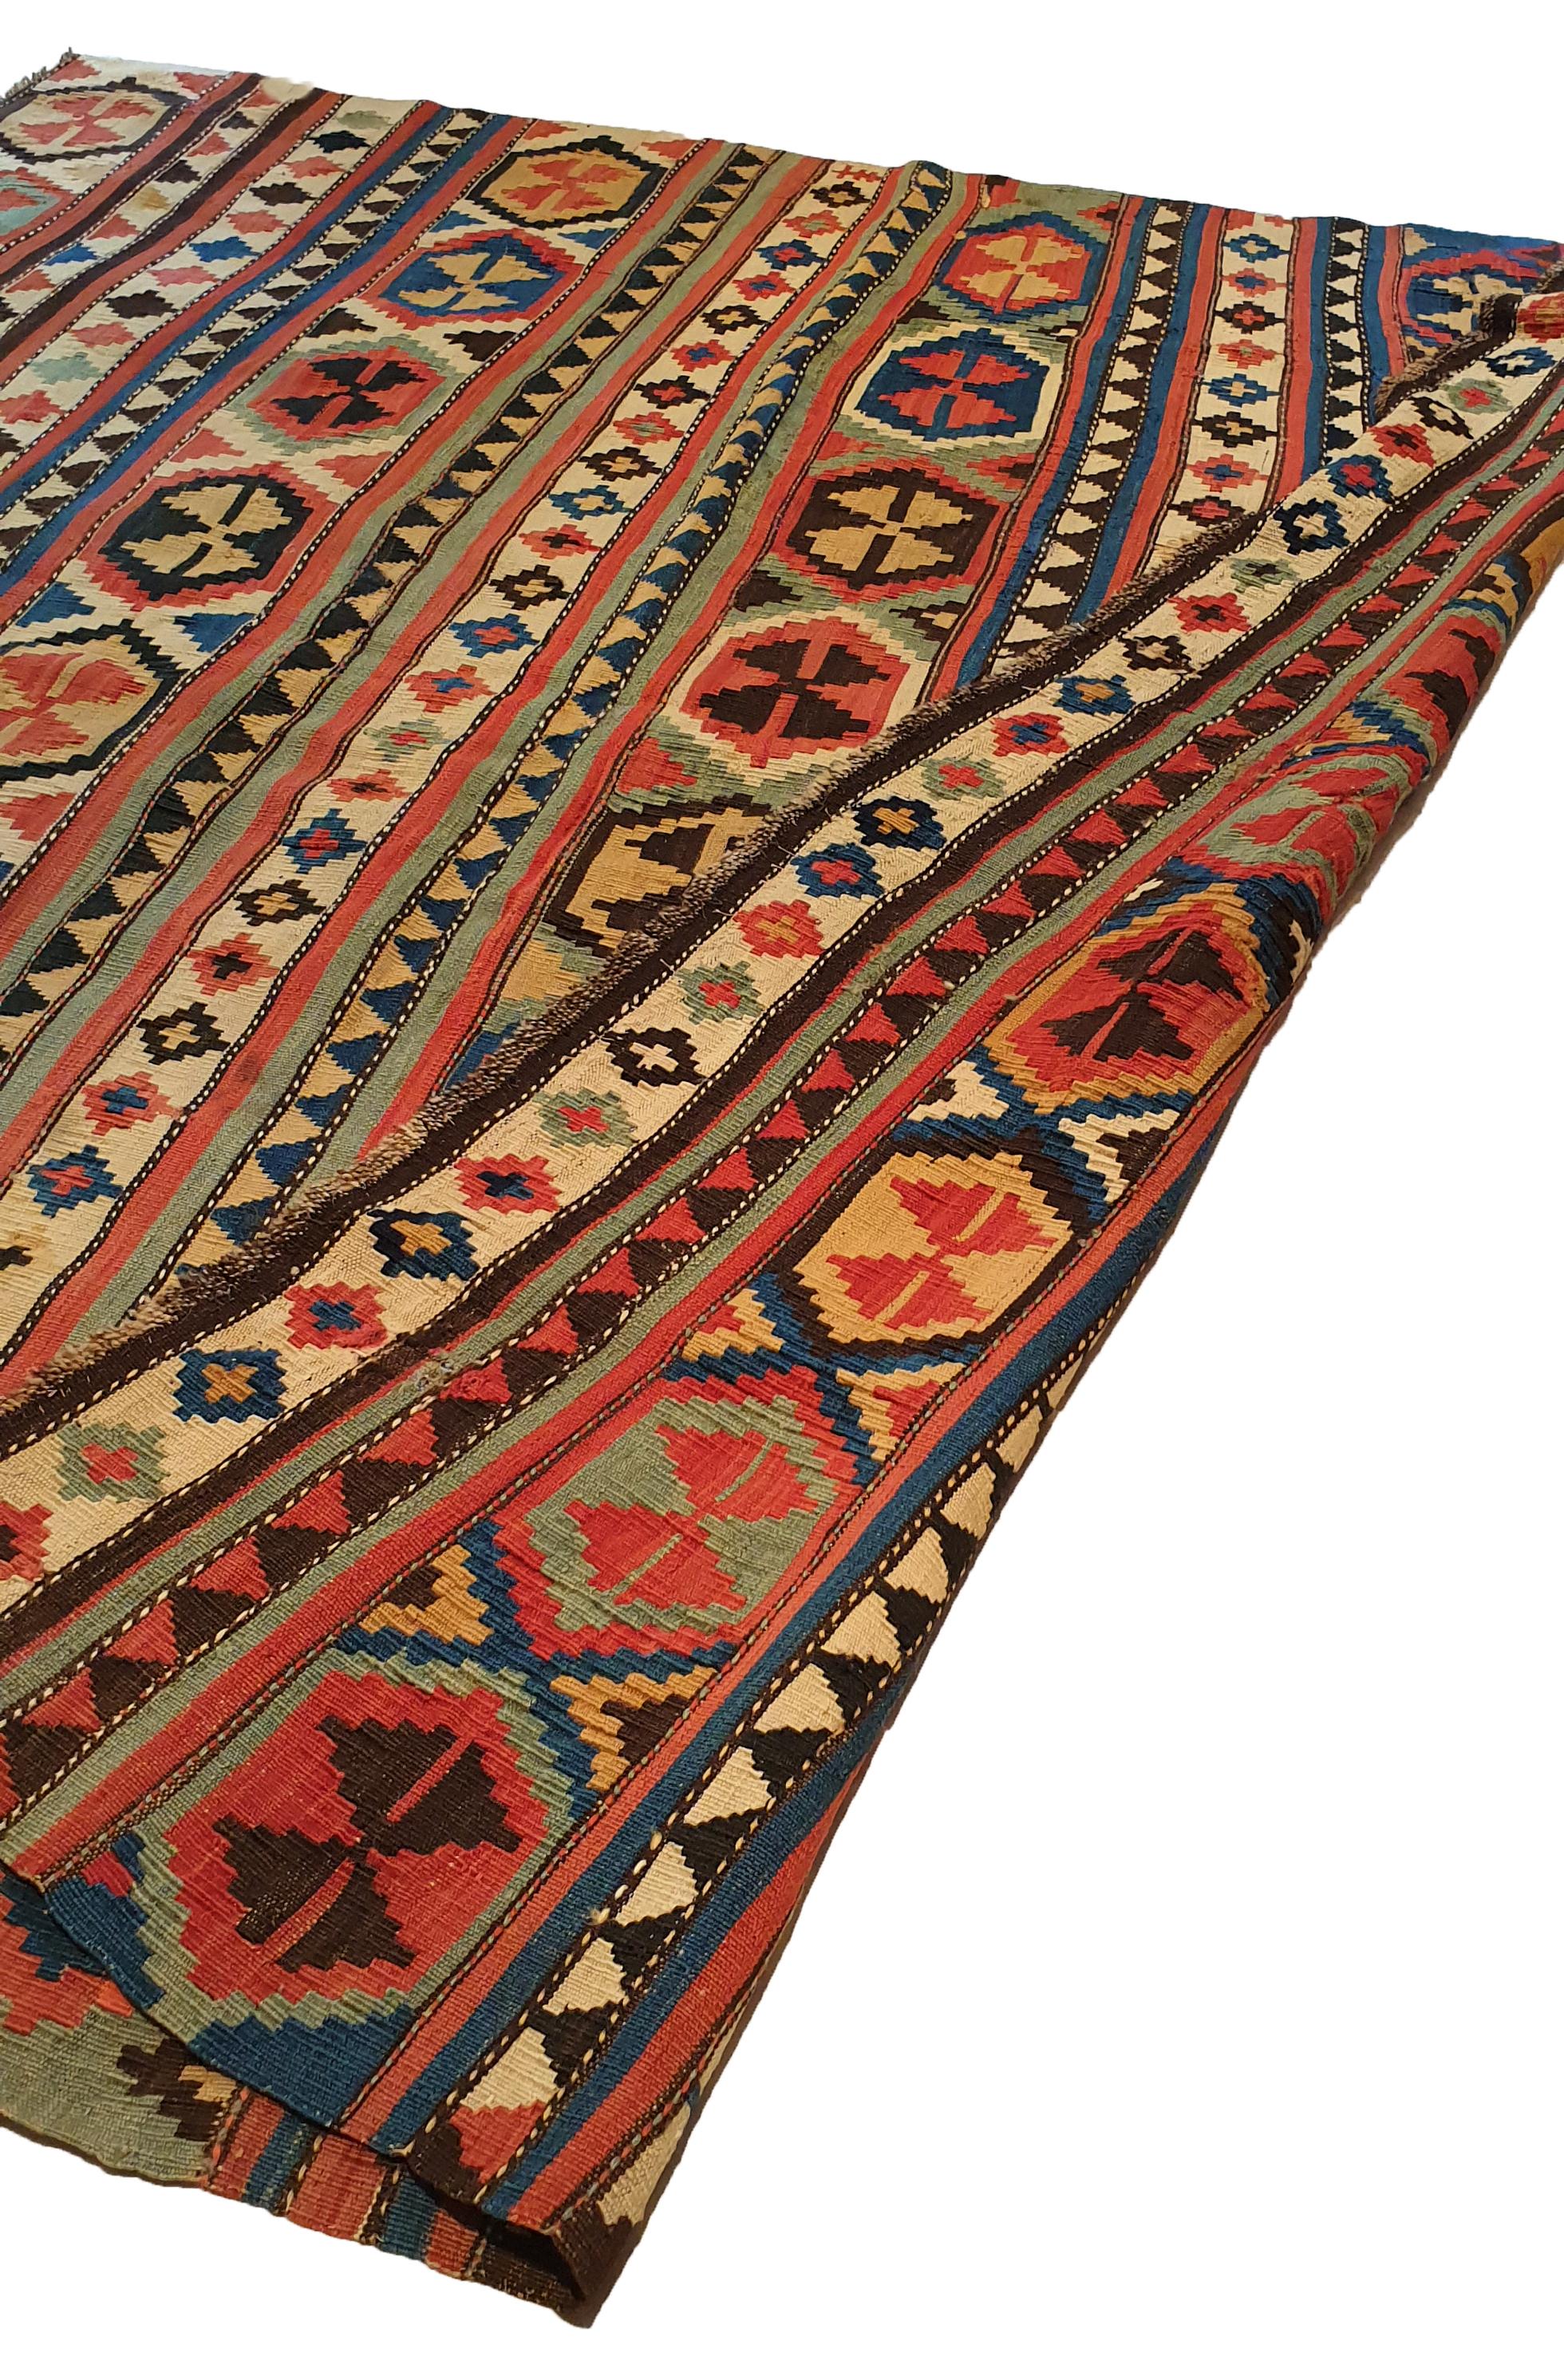 Wool 754 - Kilim from the Late 19th Century Caucasian